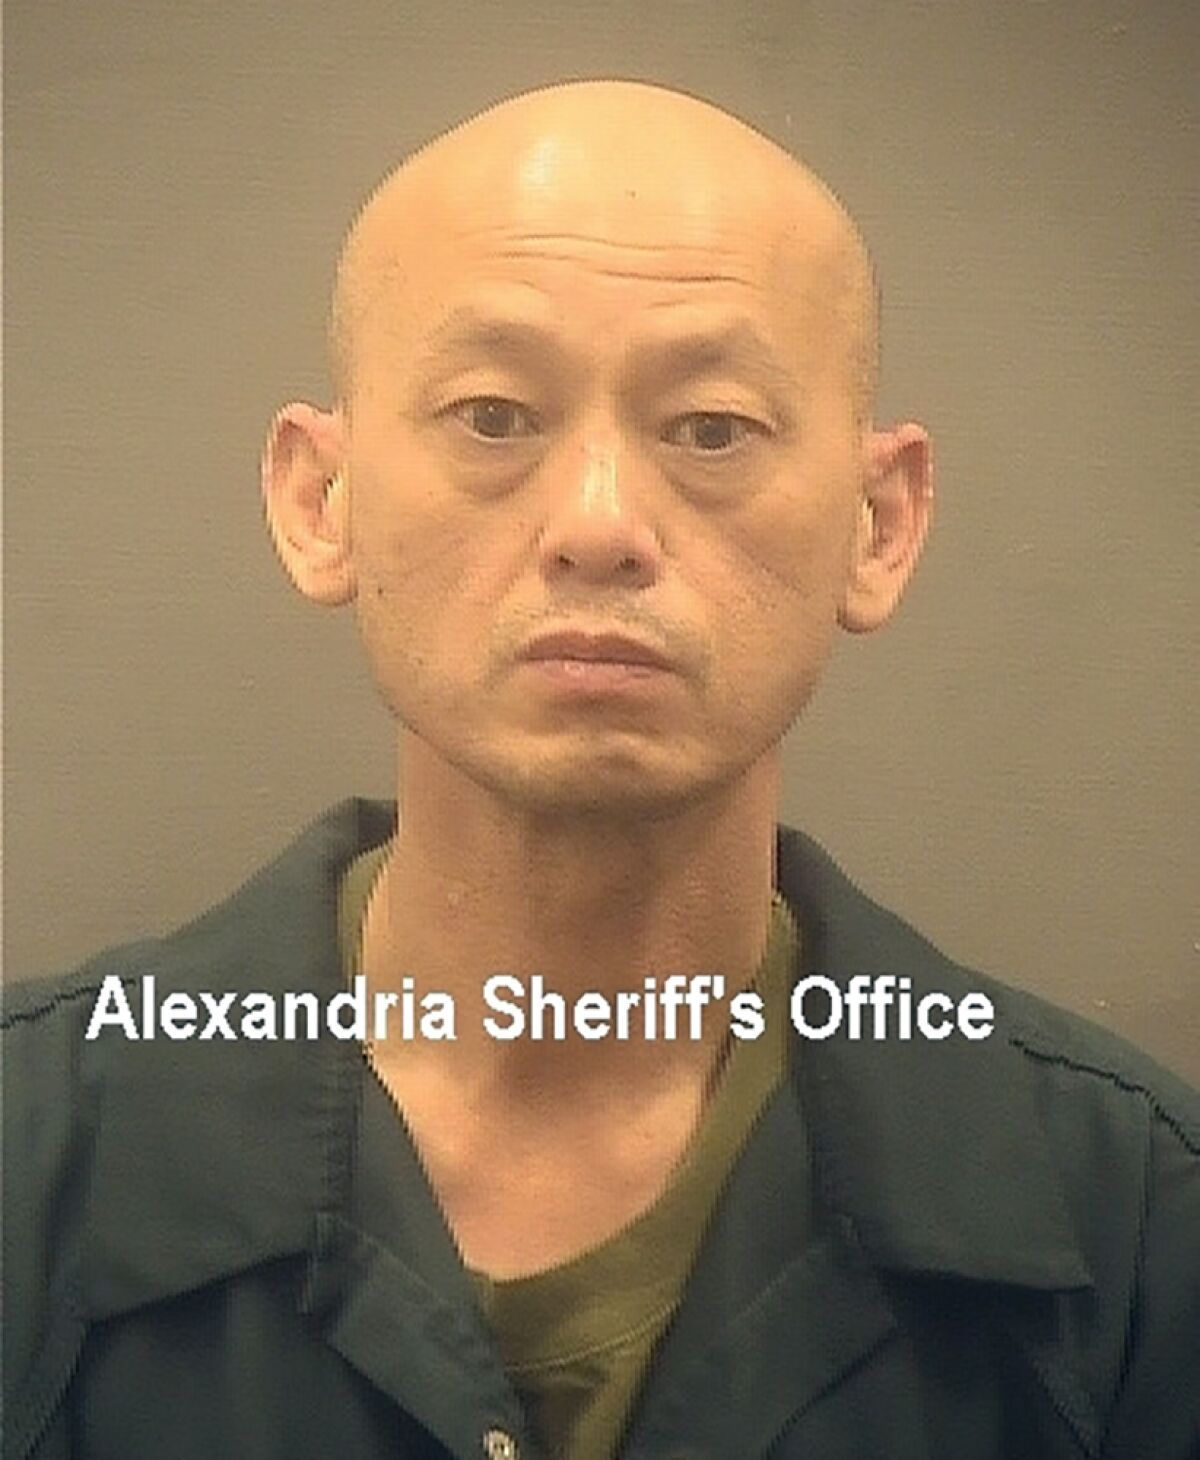 This image provided by the Alexandria, Va., Sheriff's Office shows Quin Ngoc Rudin, 45, an ex-convict from California, who has pleaded guilty to fraud schemes totaling more than $25 million that included exaggerated tax returns for professional athletes and exploiting federal pandemic relief programs, Friday, May 13 2022, in U.S. District Court in Alexandria, Va.